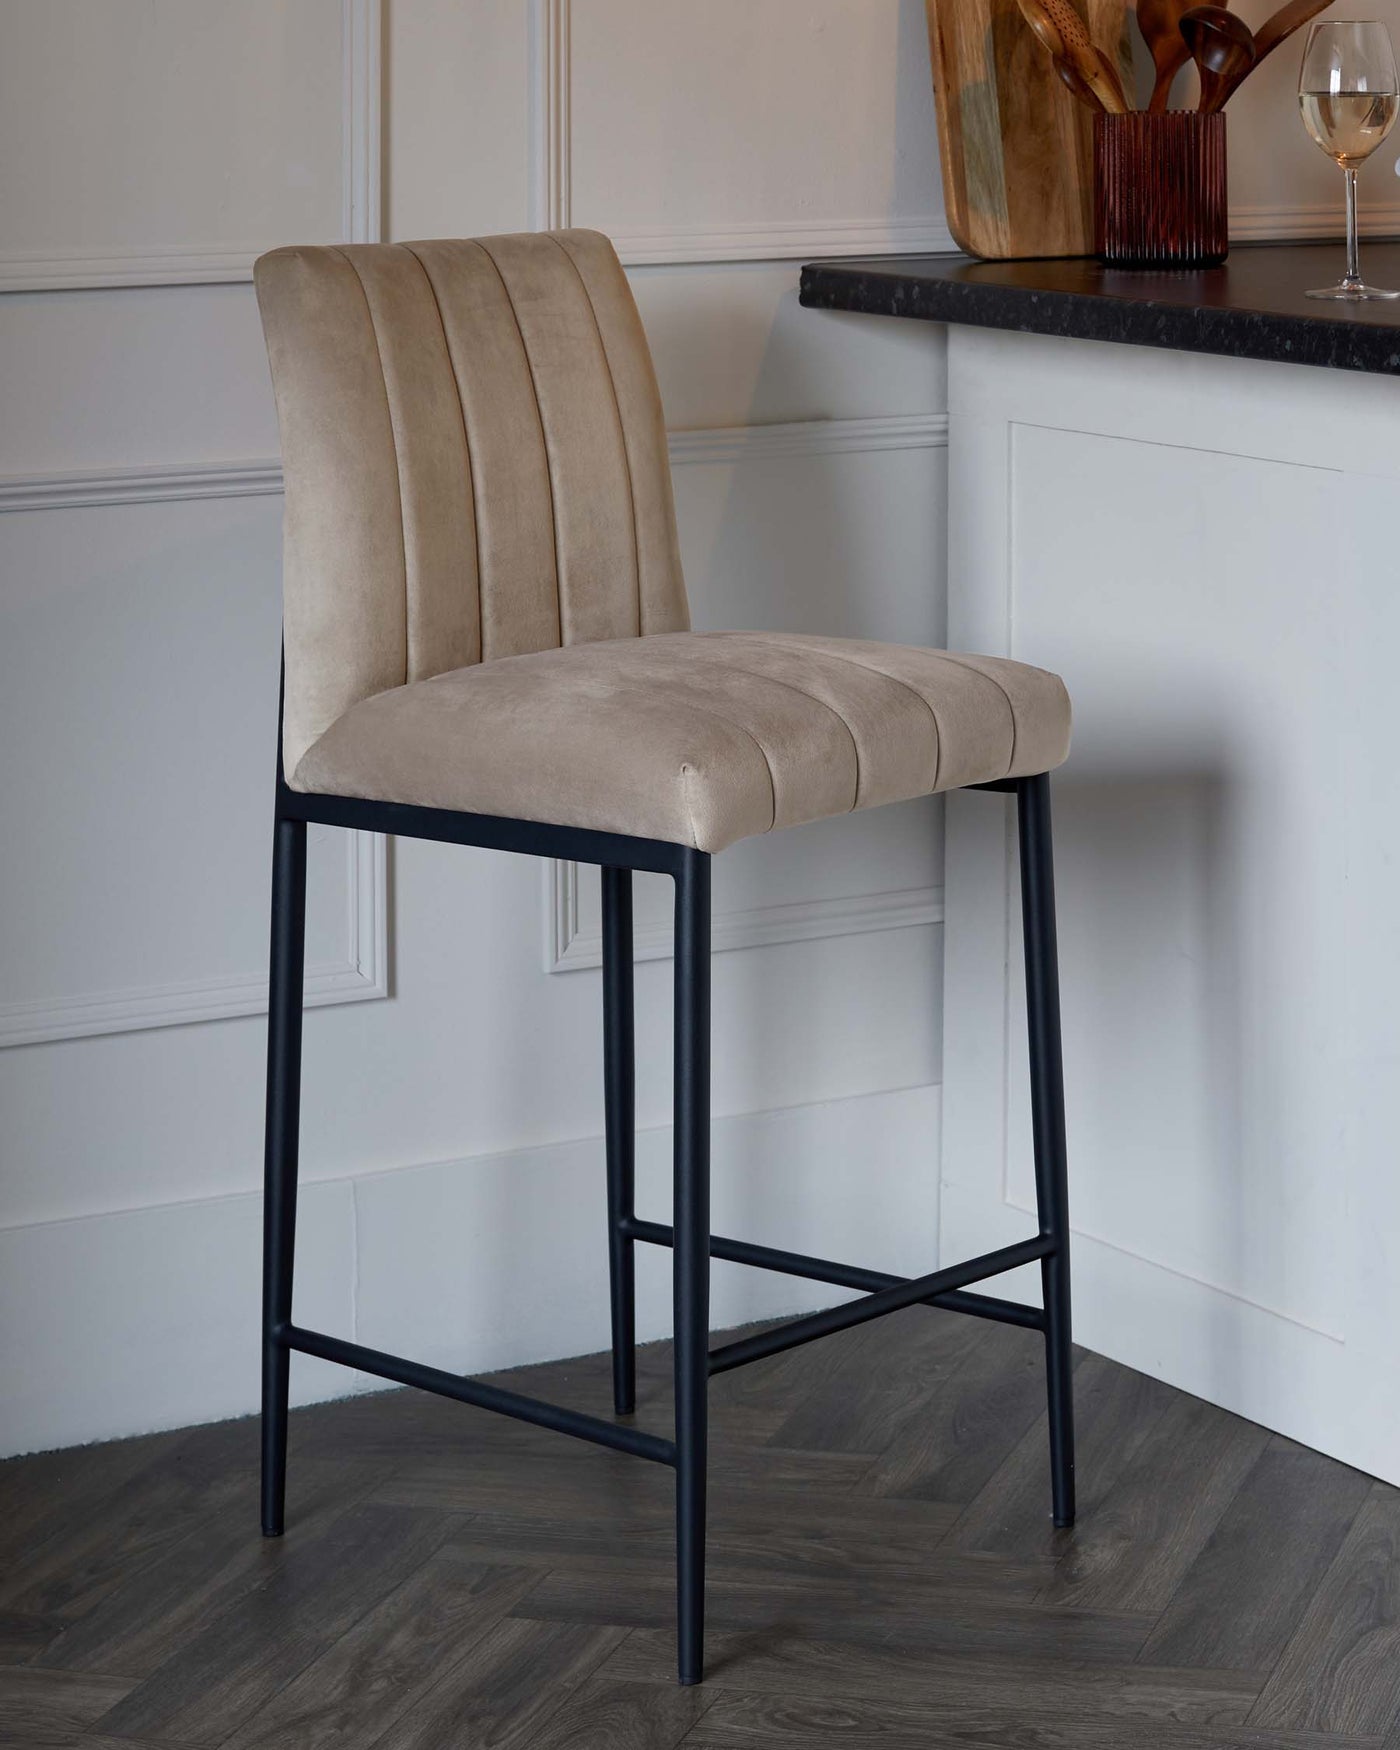 Modern velvet upholstered bar stool with vertical channel tufting on the backrest and a cushioned seat, featuring a sturdy black metal frame with four legs and interconnected footrests.